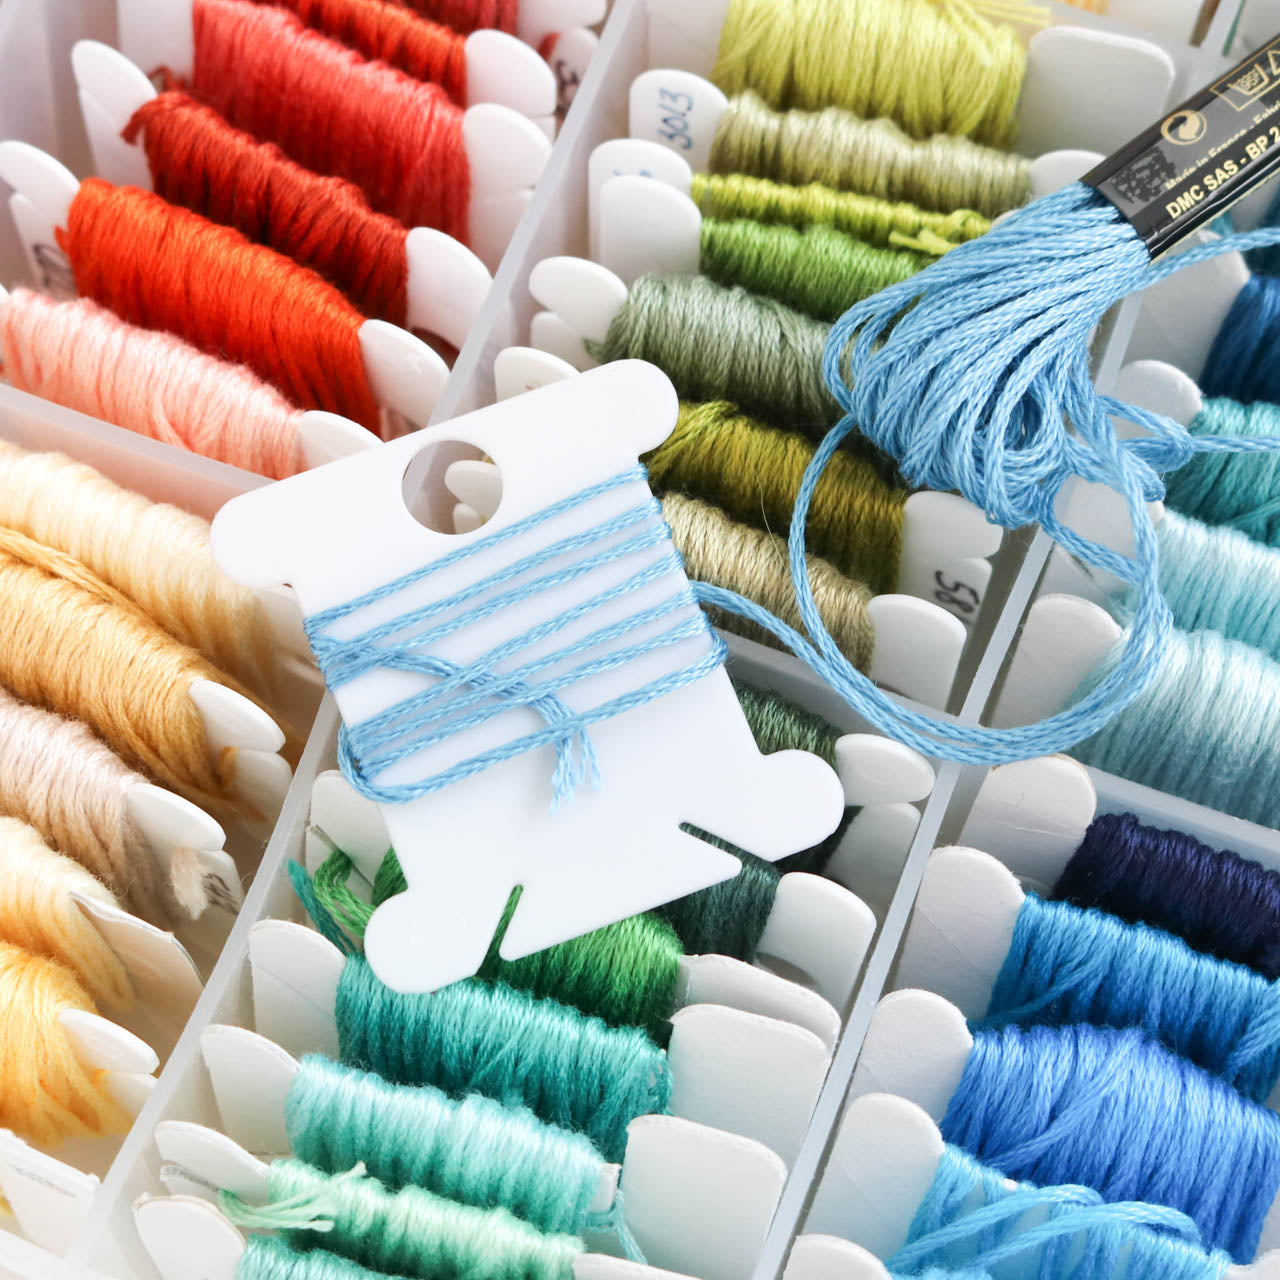 Plastic Embroidery Floss Bobbins - Stitched Modern